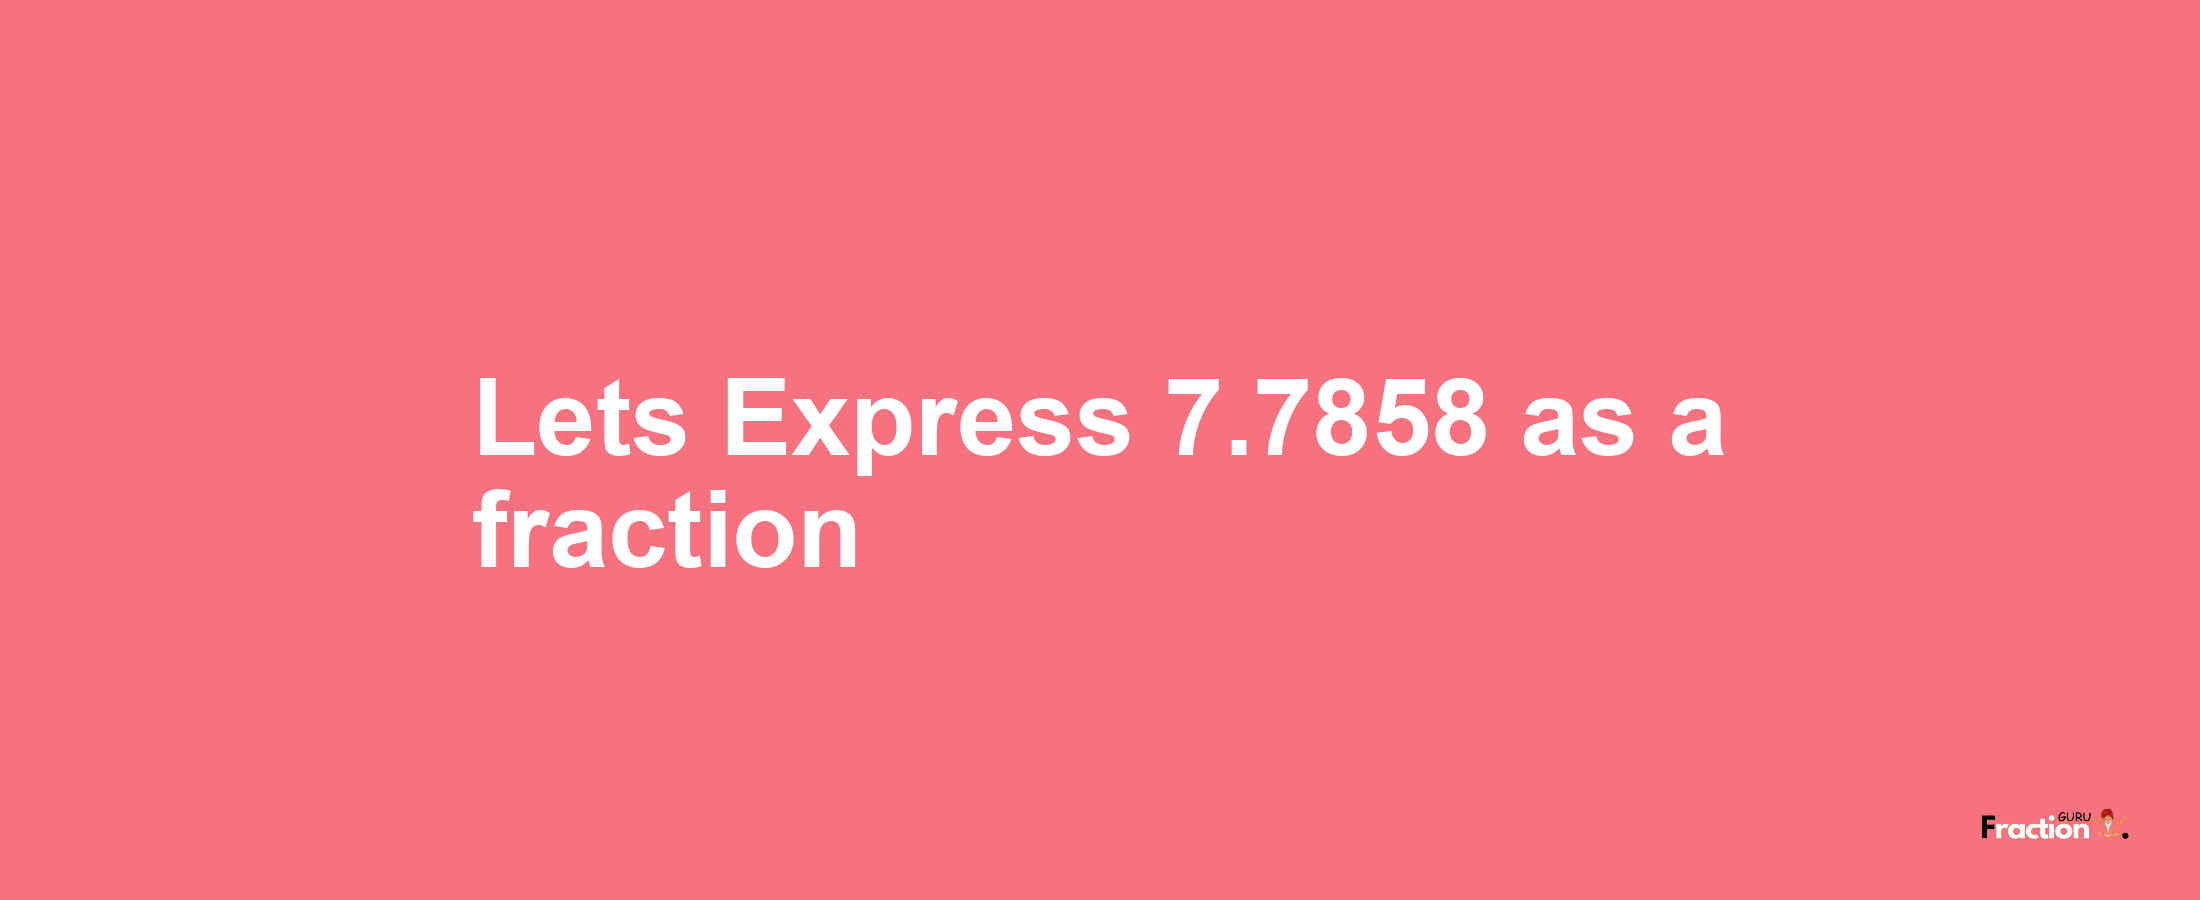 Lets Express 7.7858 as afraction